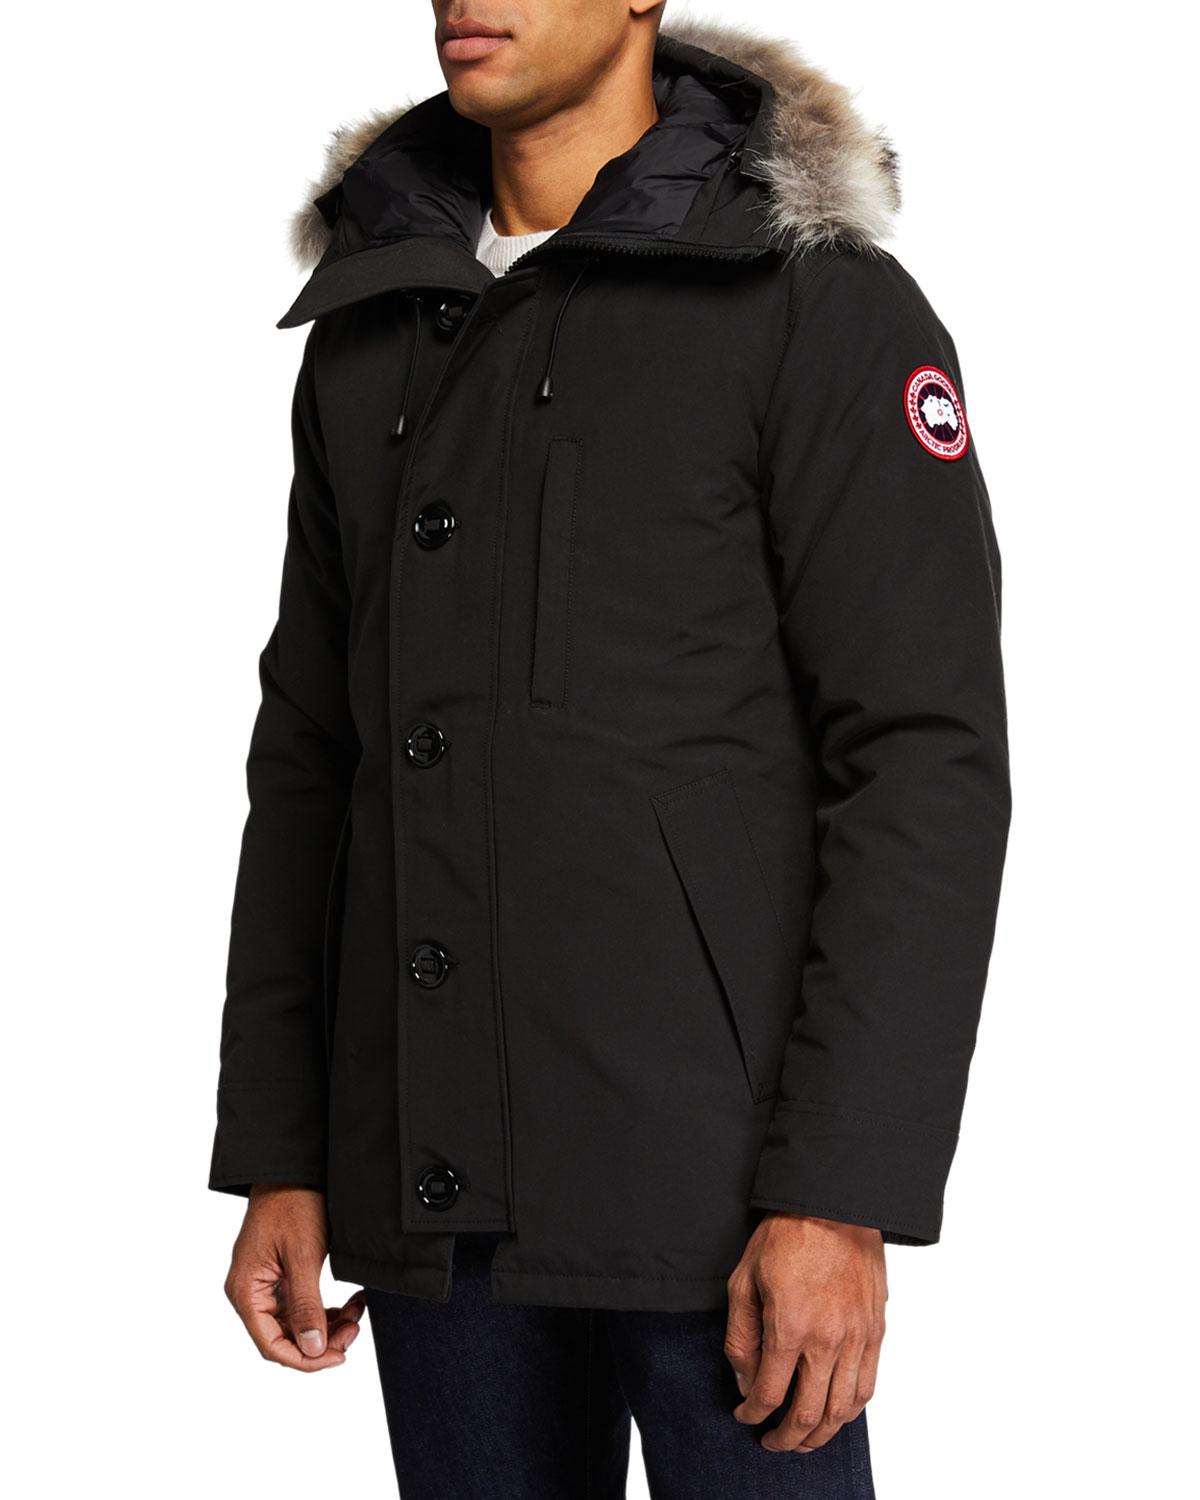 Purchase > canada goose chateau parka fusion fit, Up to 79% OFF